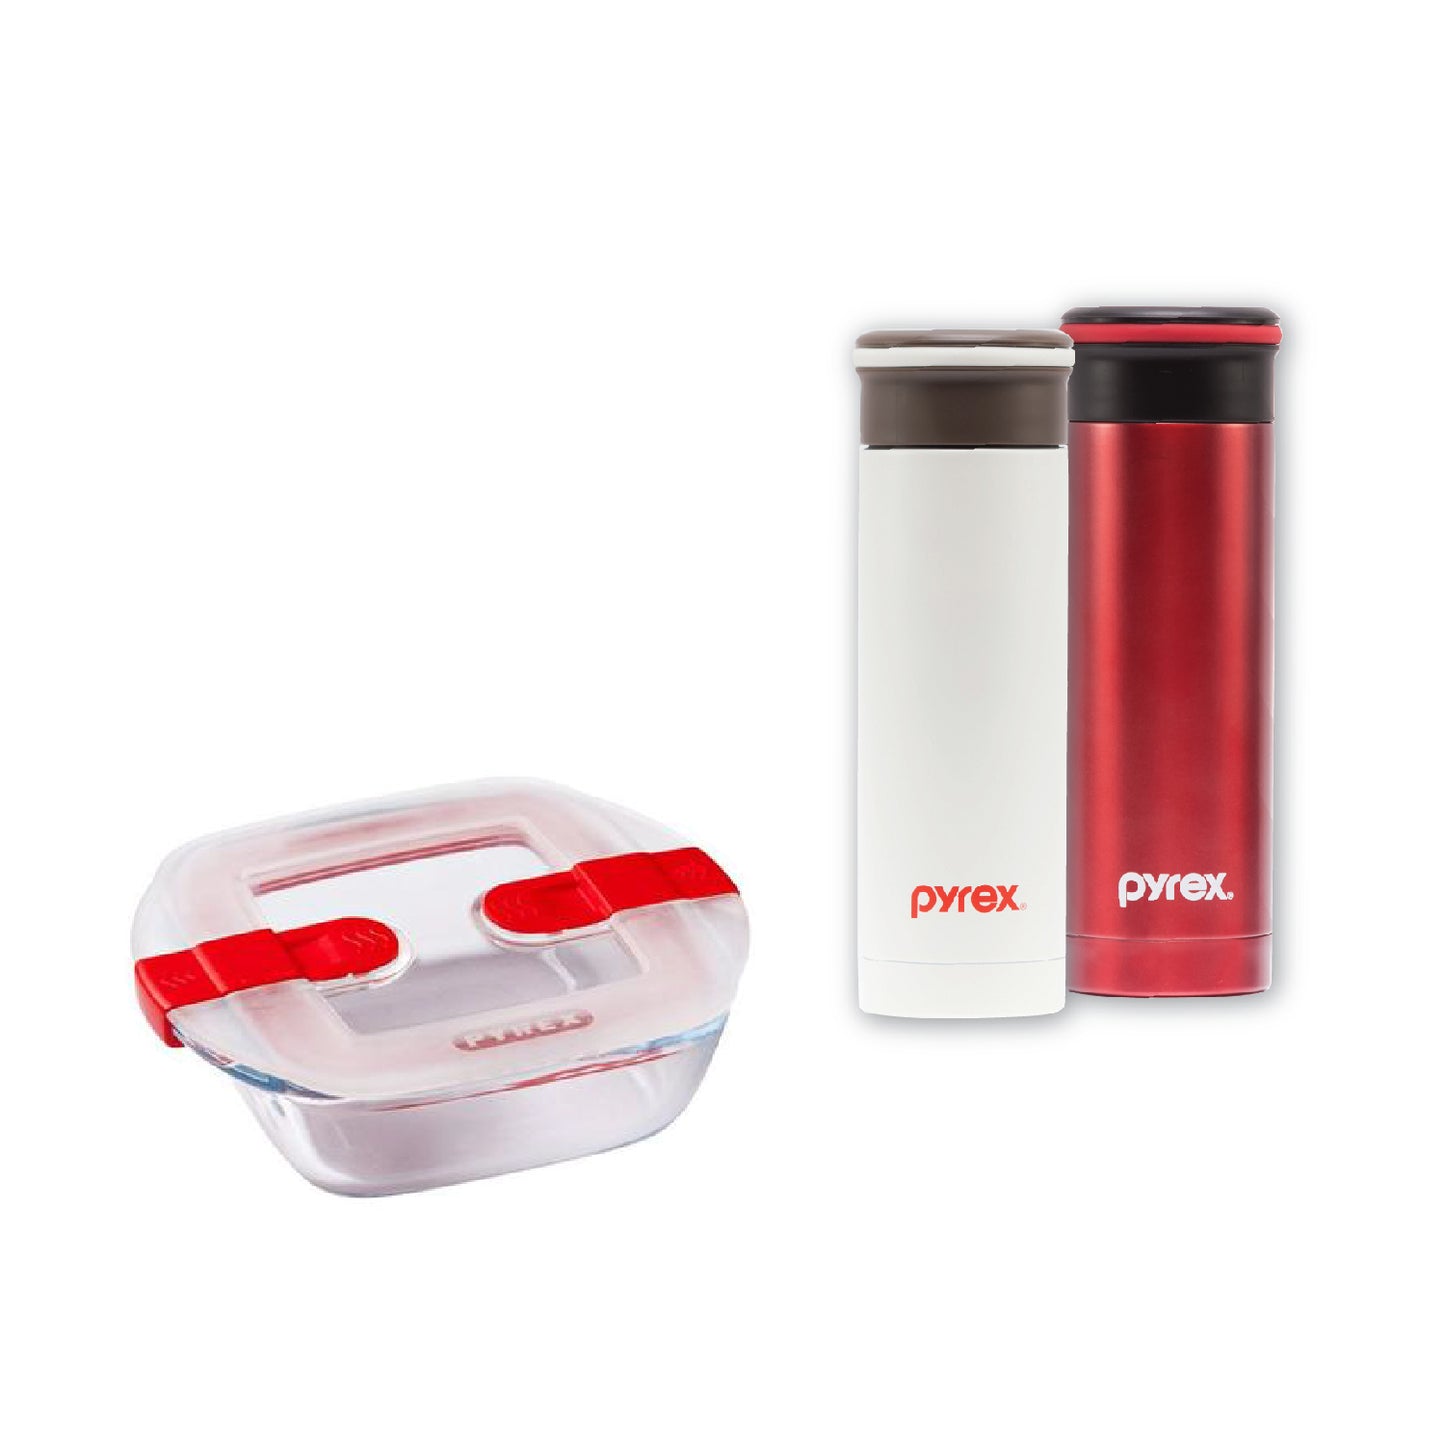 Pyrex Square Dish with Lid 1L & Easy Grip Tumbler 300ml (Red & White)